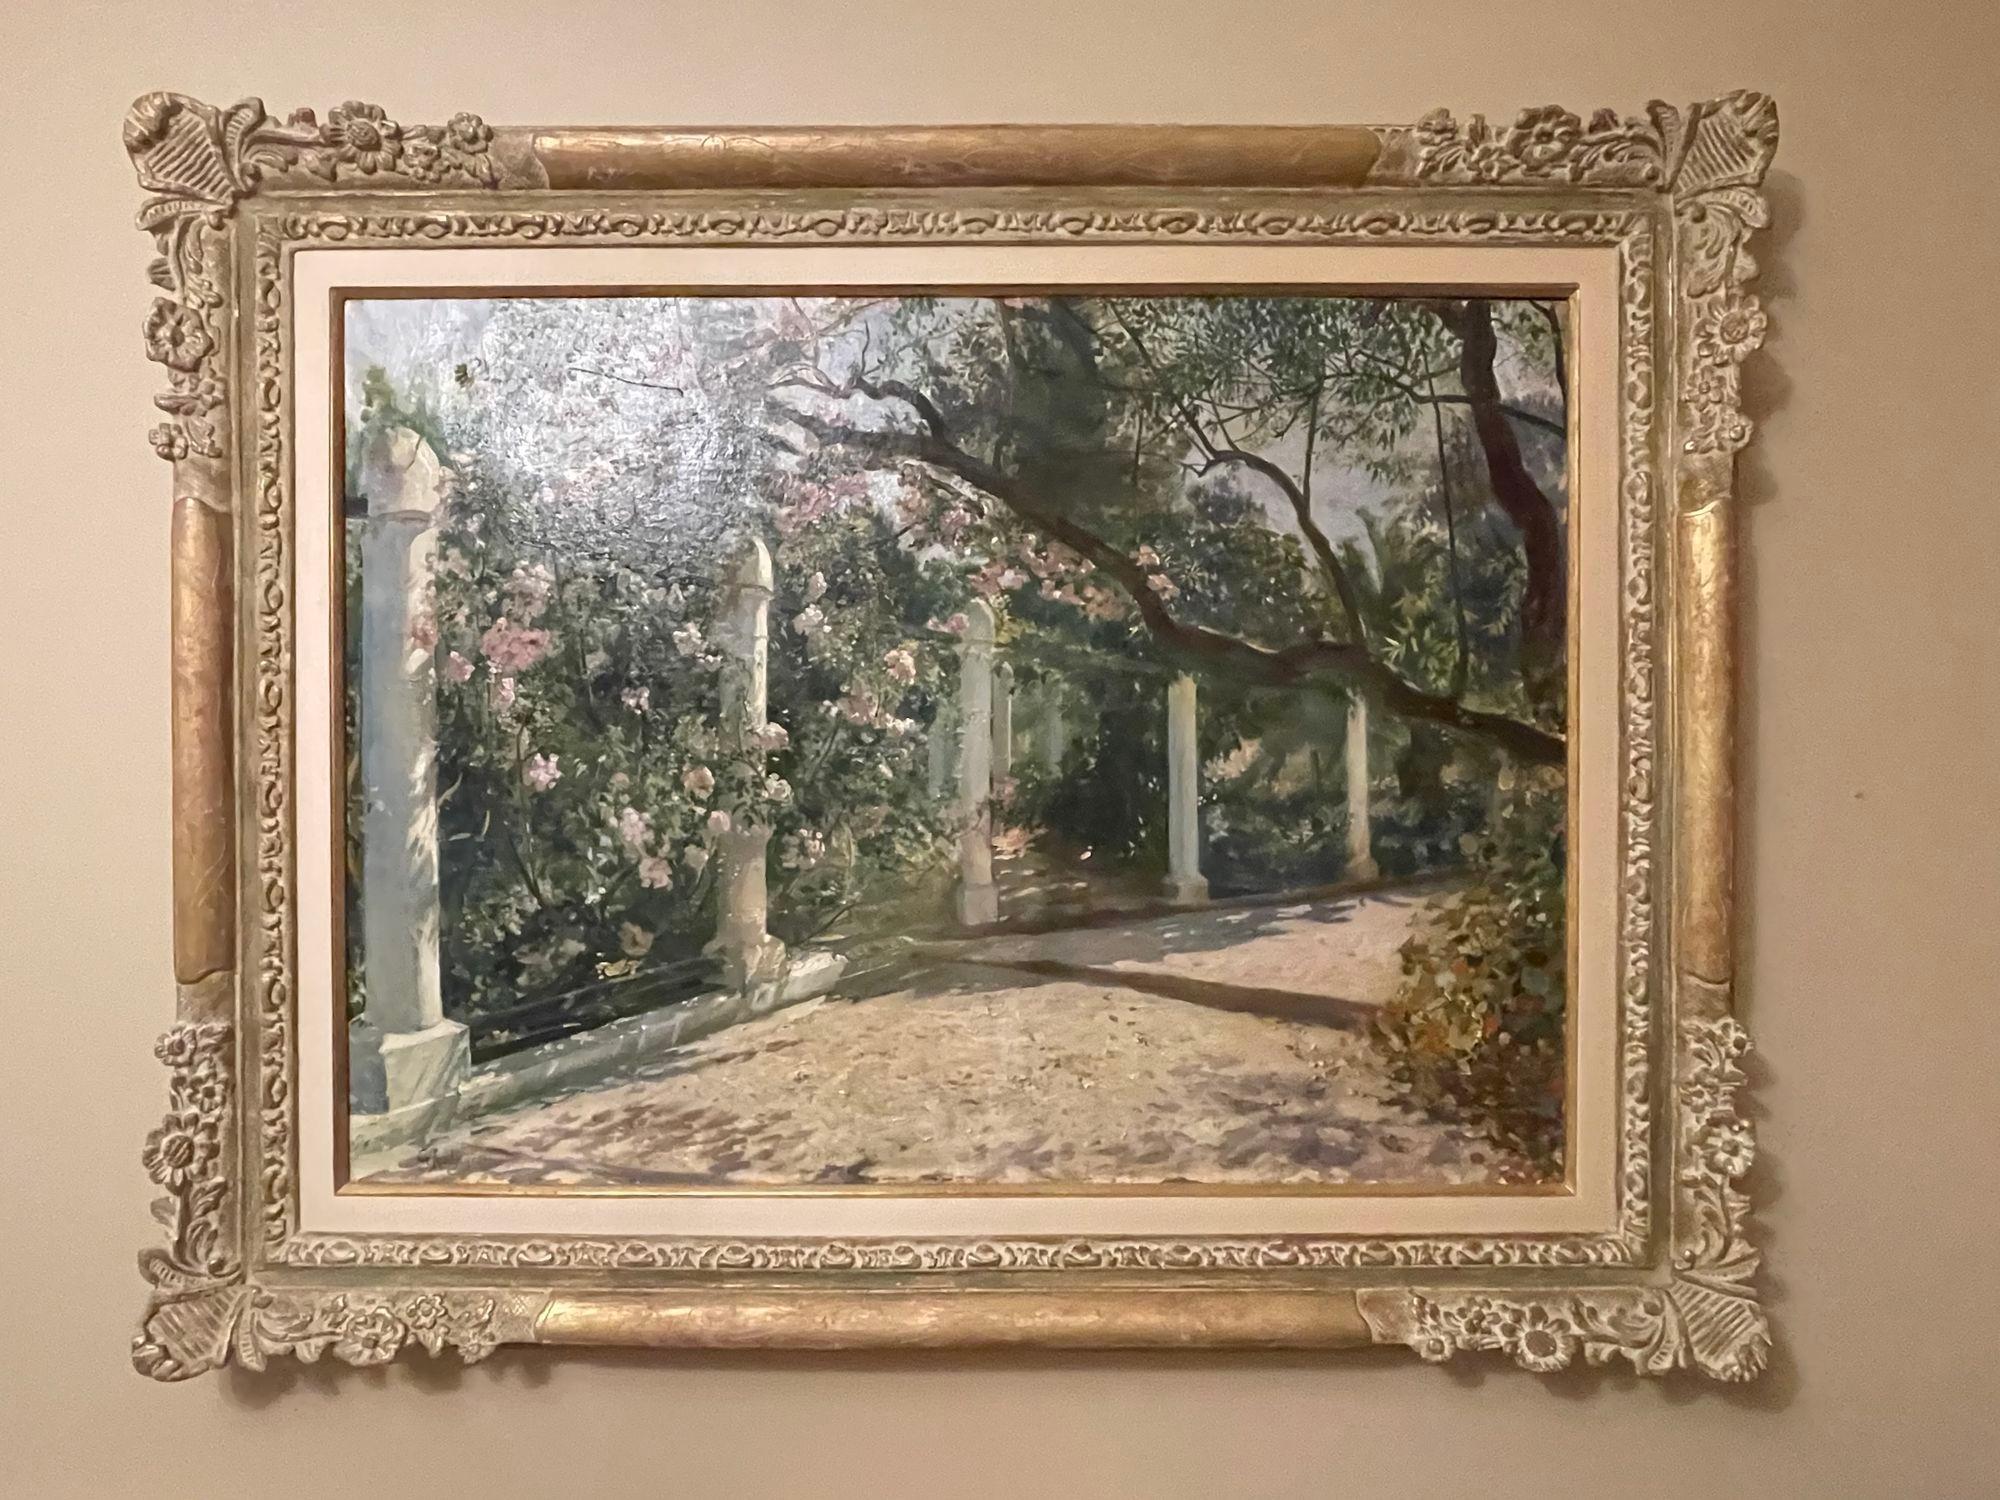 Oil on Canvas, Georges Antoine Rochegrosse, Almond Trees, Sotheby's NYC Provenance
This poignant large and impressive oil on canvas is an important work as it most likely depicts the gardens of Villa El Biar, Algiers, where Rochegrosse and his wife